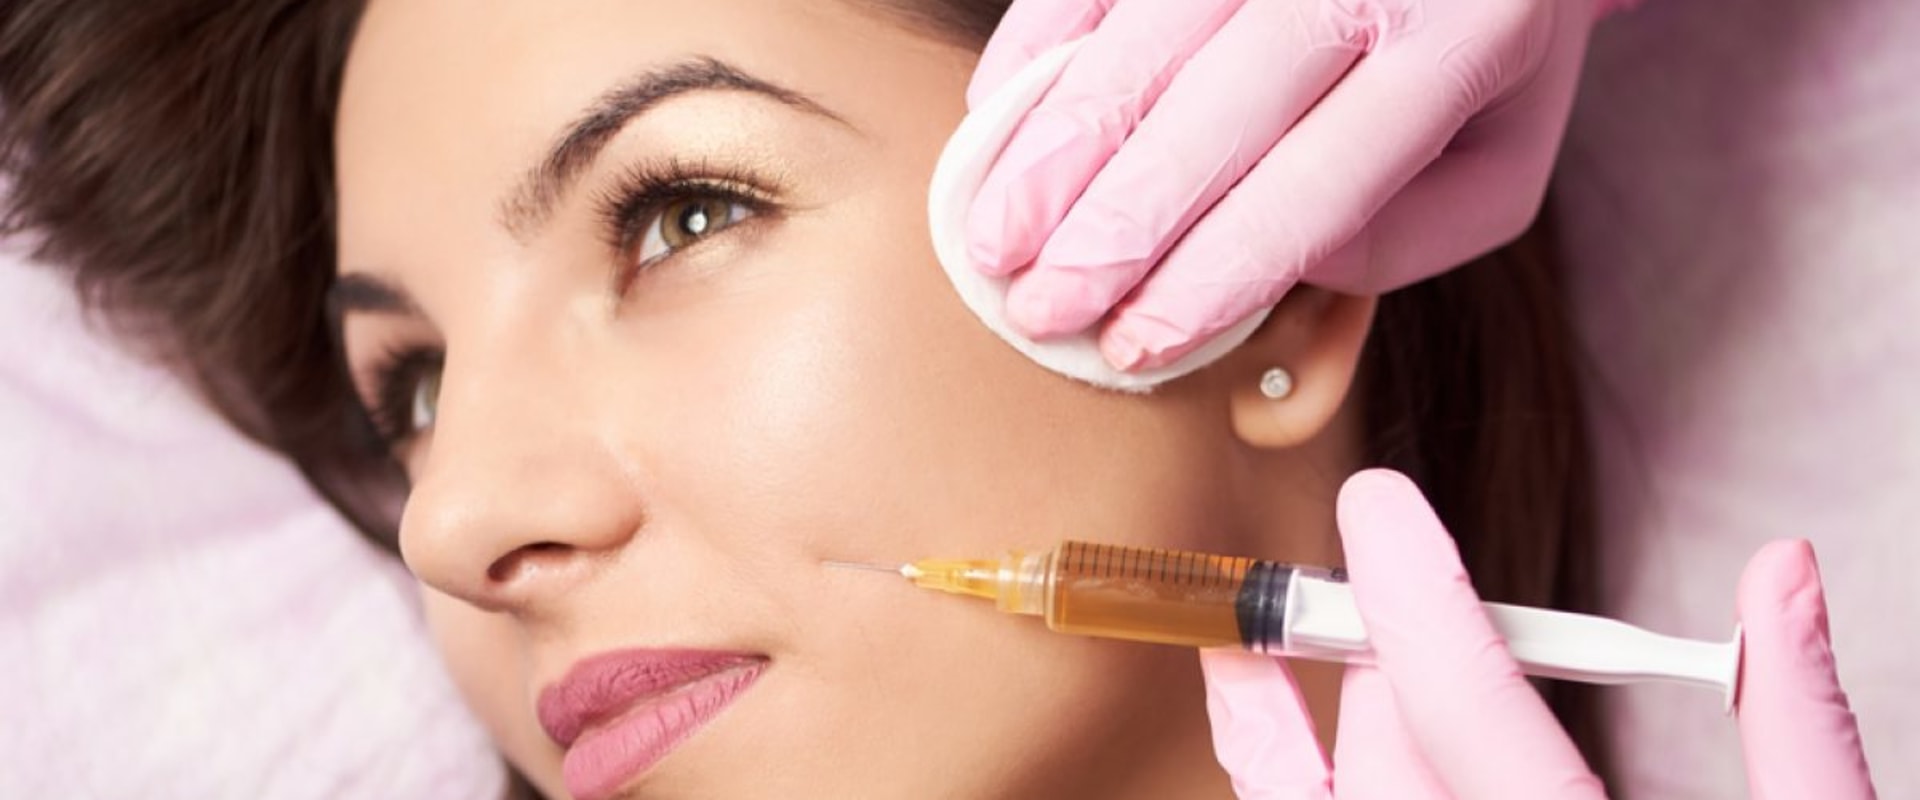 Are Dermal Fillers Safe? An Expert's Perspective